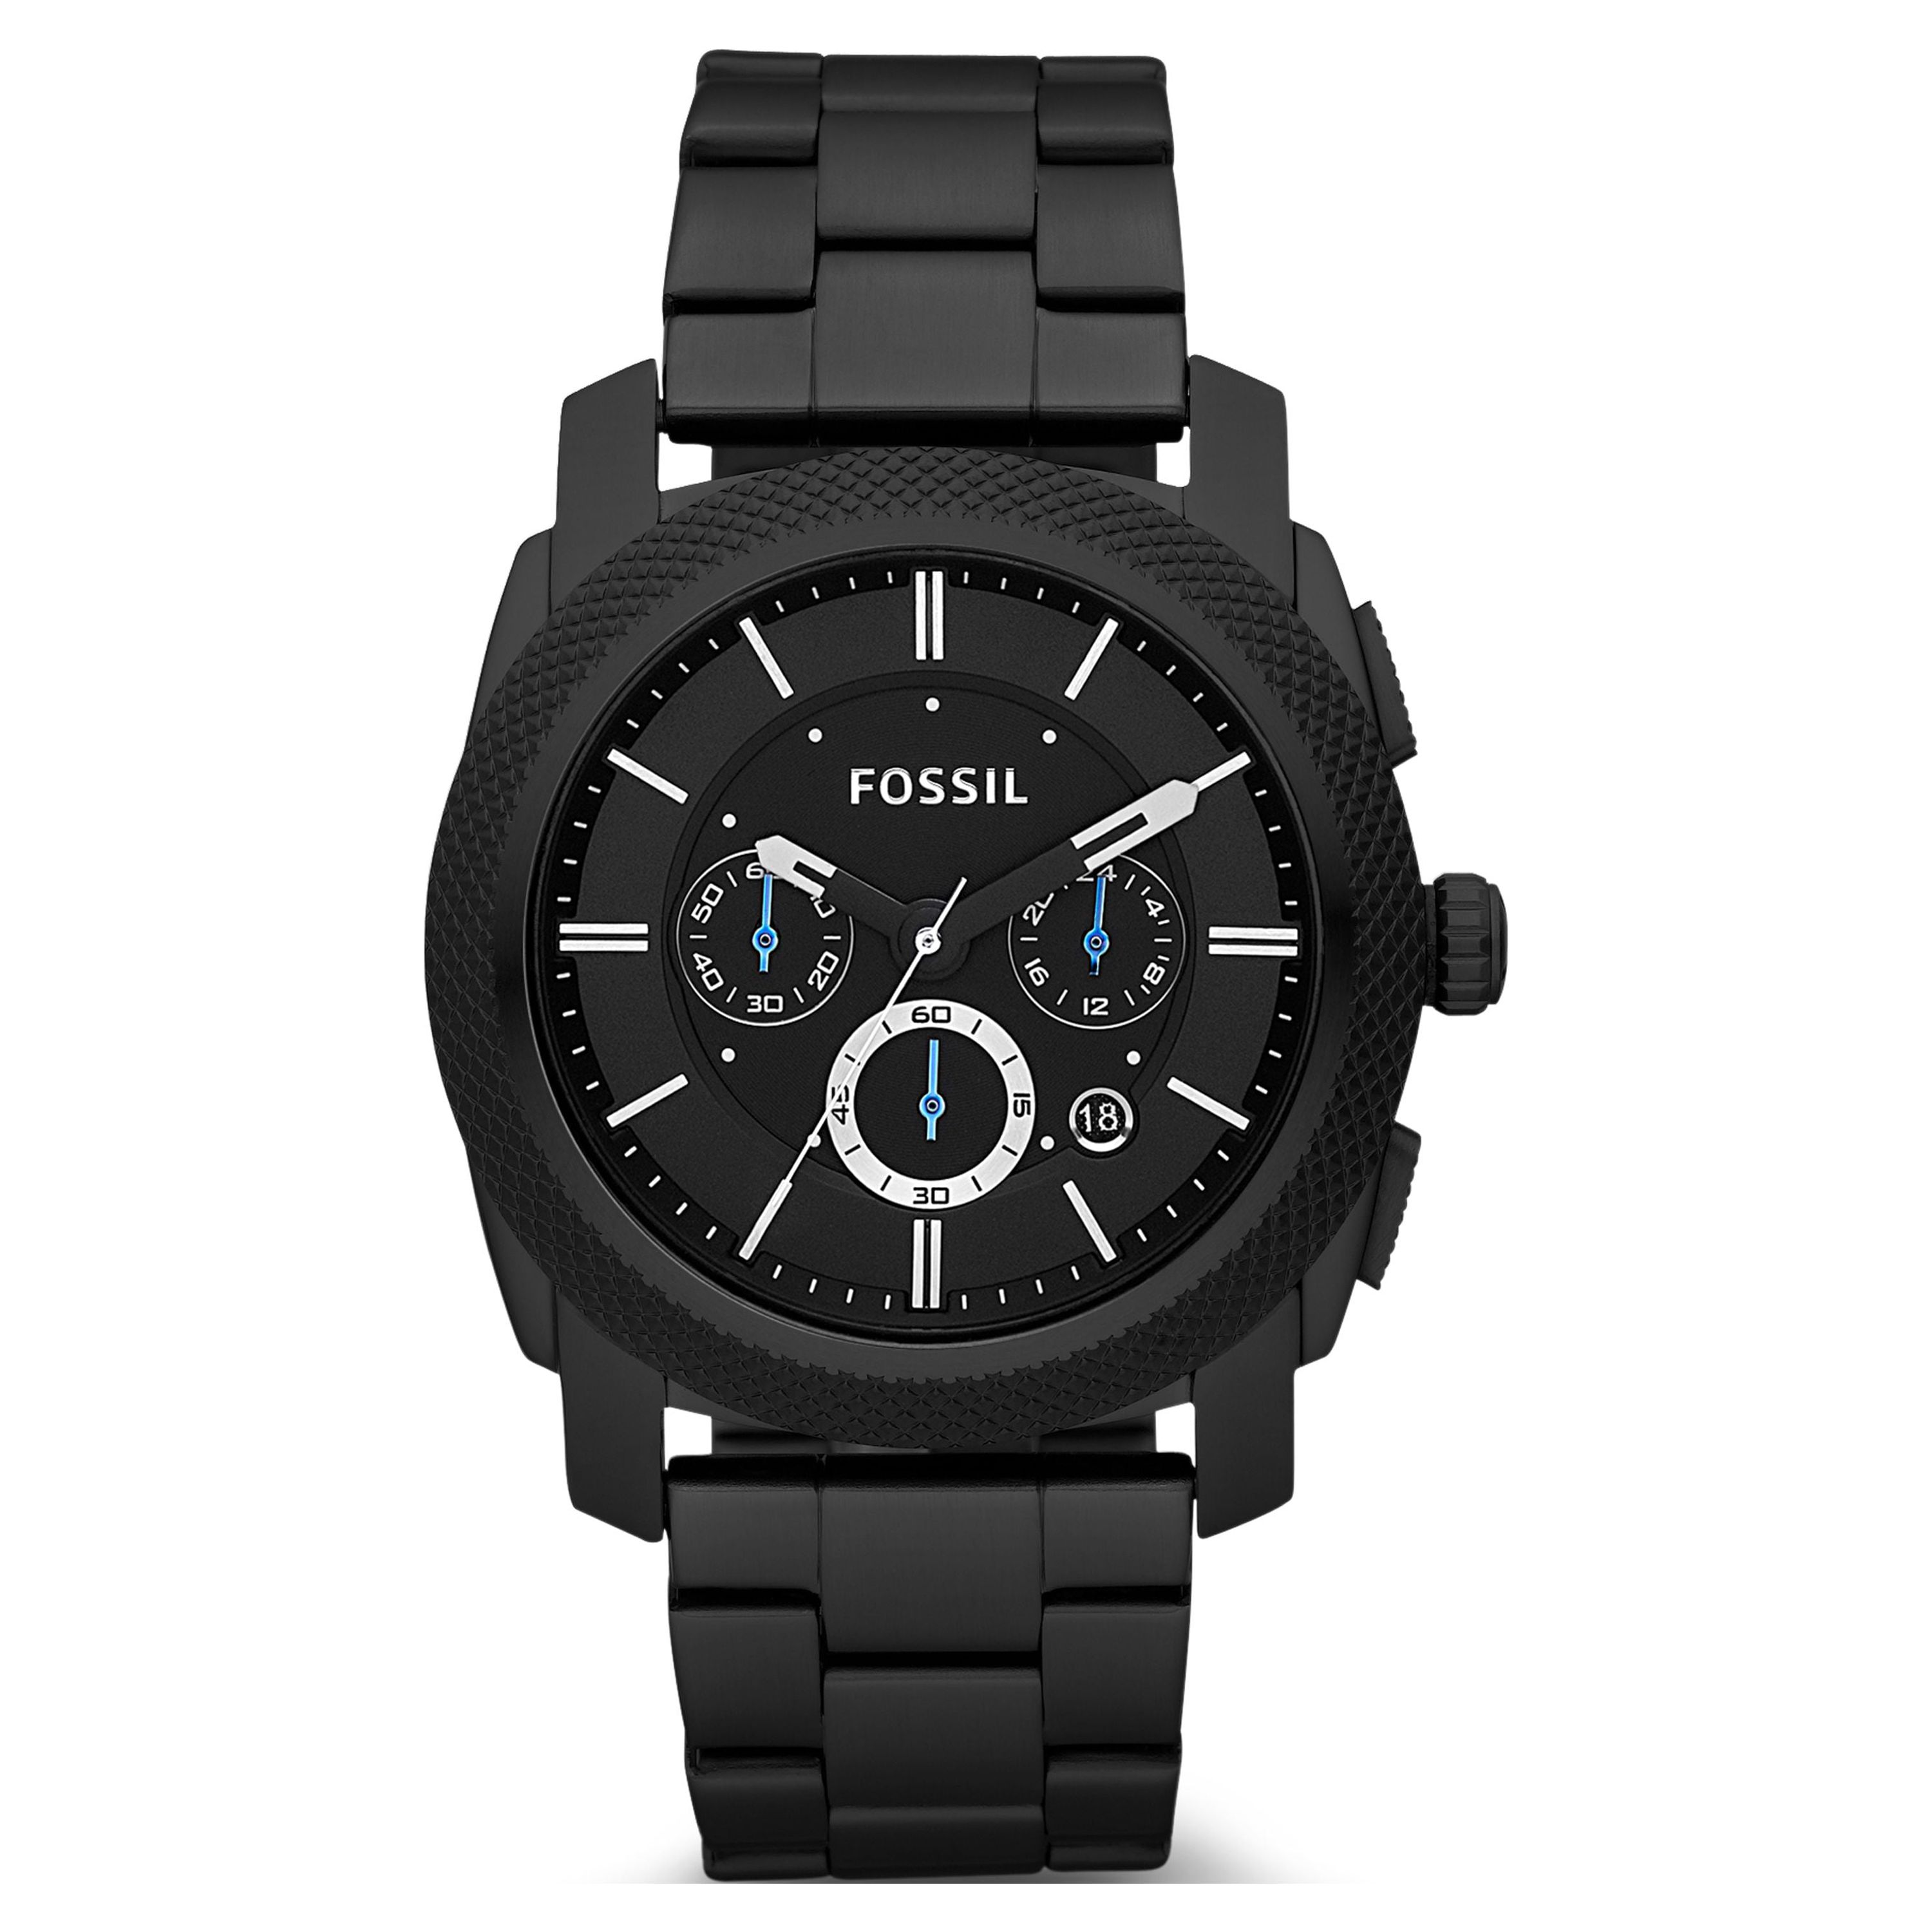 Fossil Men's Machine Chronograph, Black-Tone Stainless Steel Watch, FS4552IE - image 1 of 3